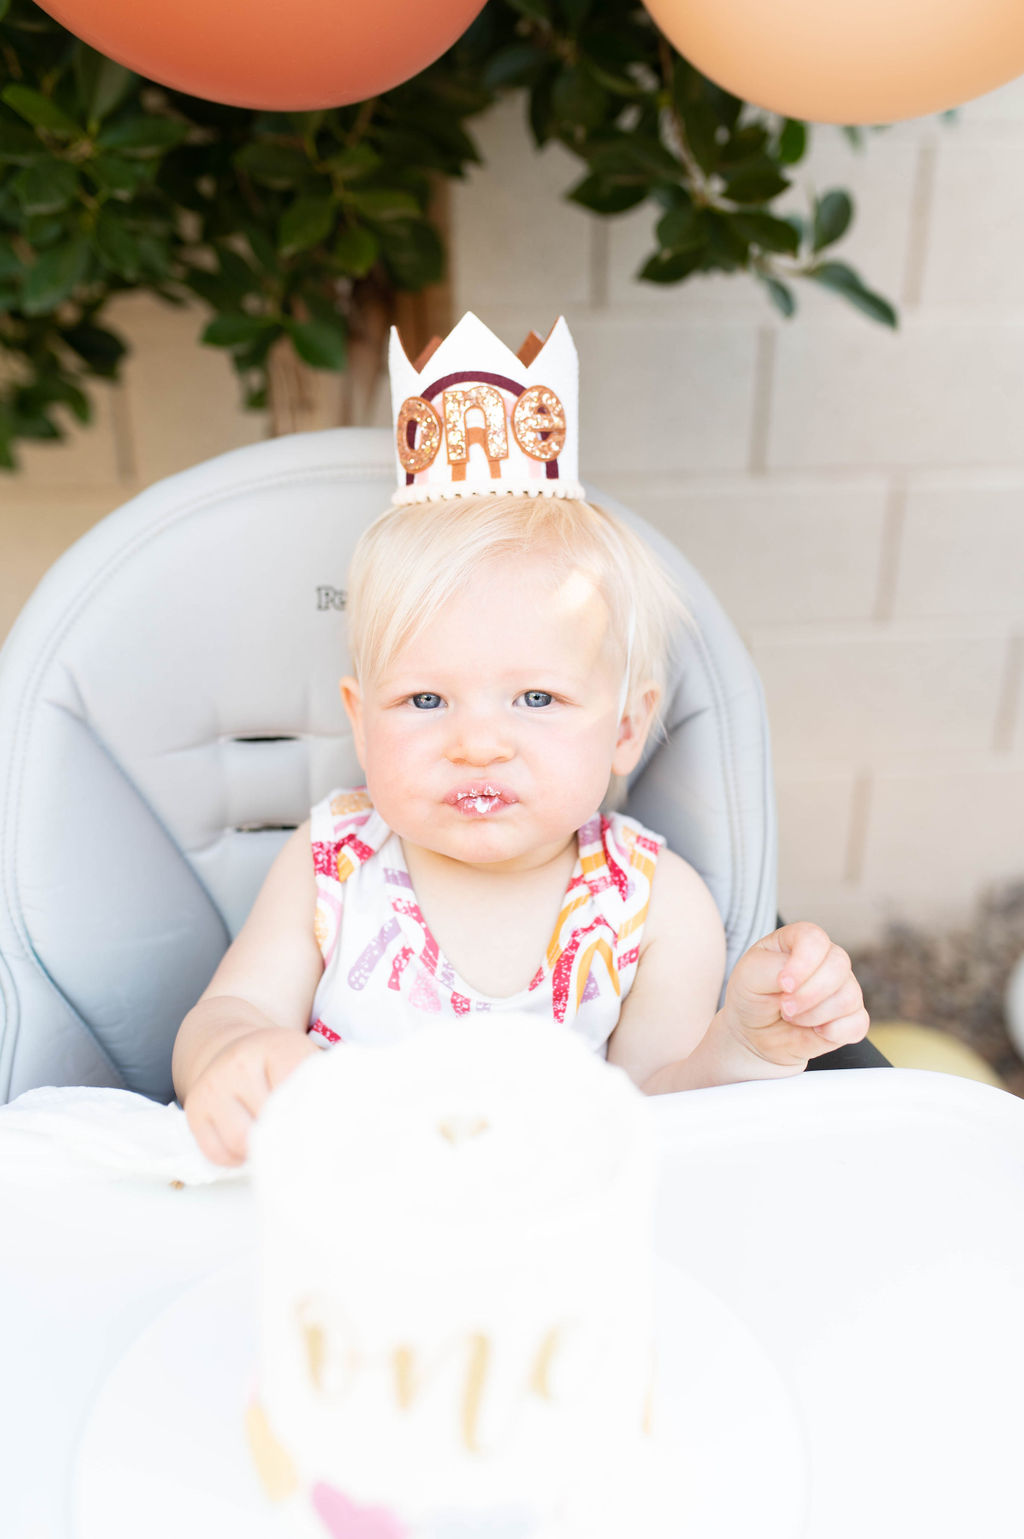 one year old blonde girl with a one year crown with a cake on her high chair tray looking at the camera